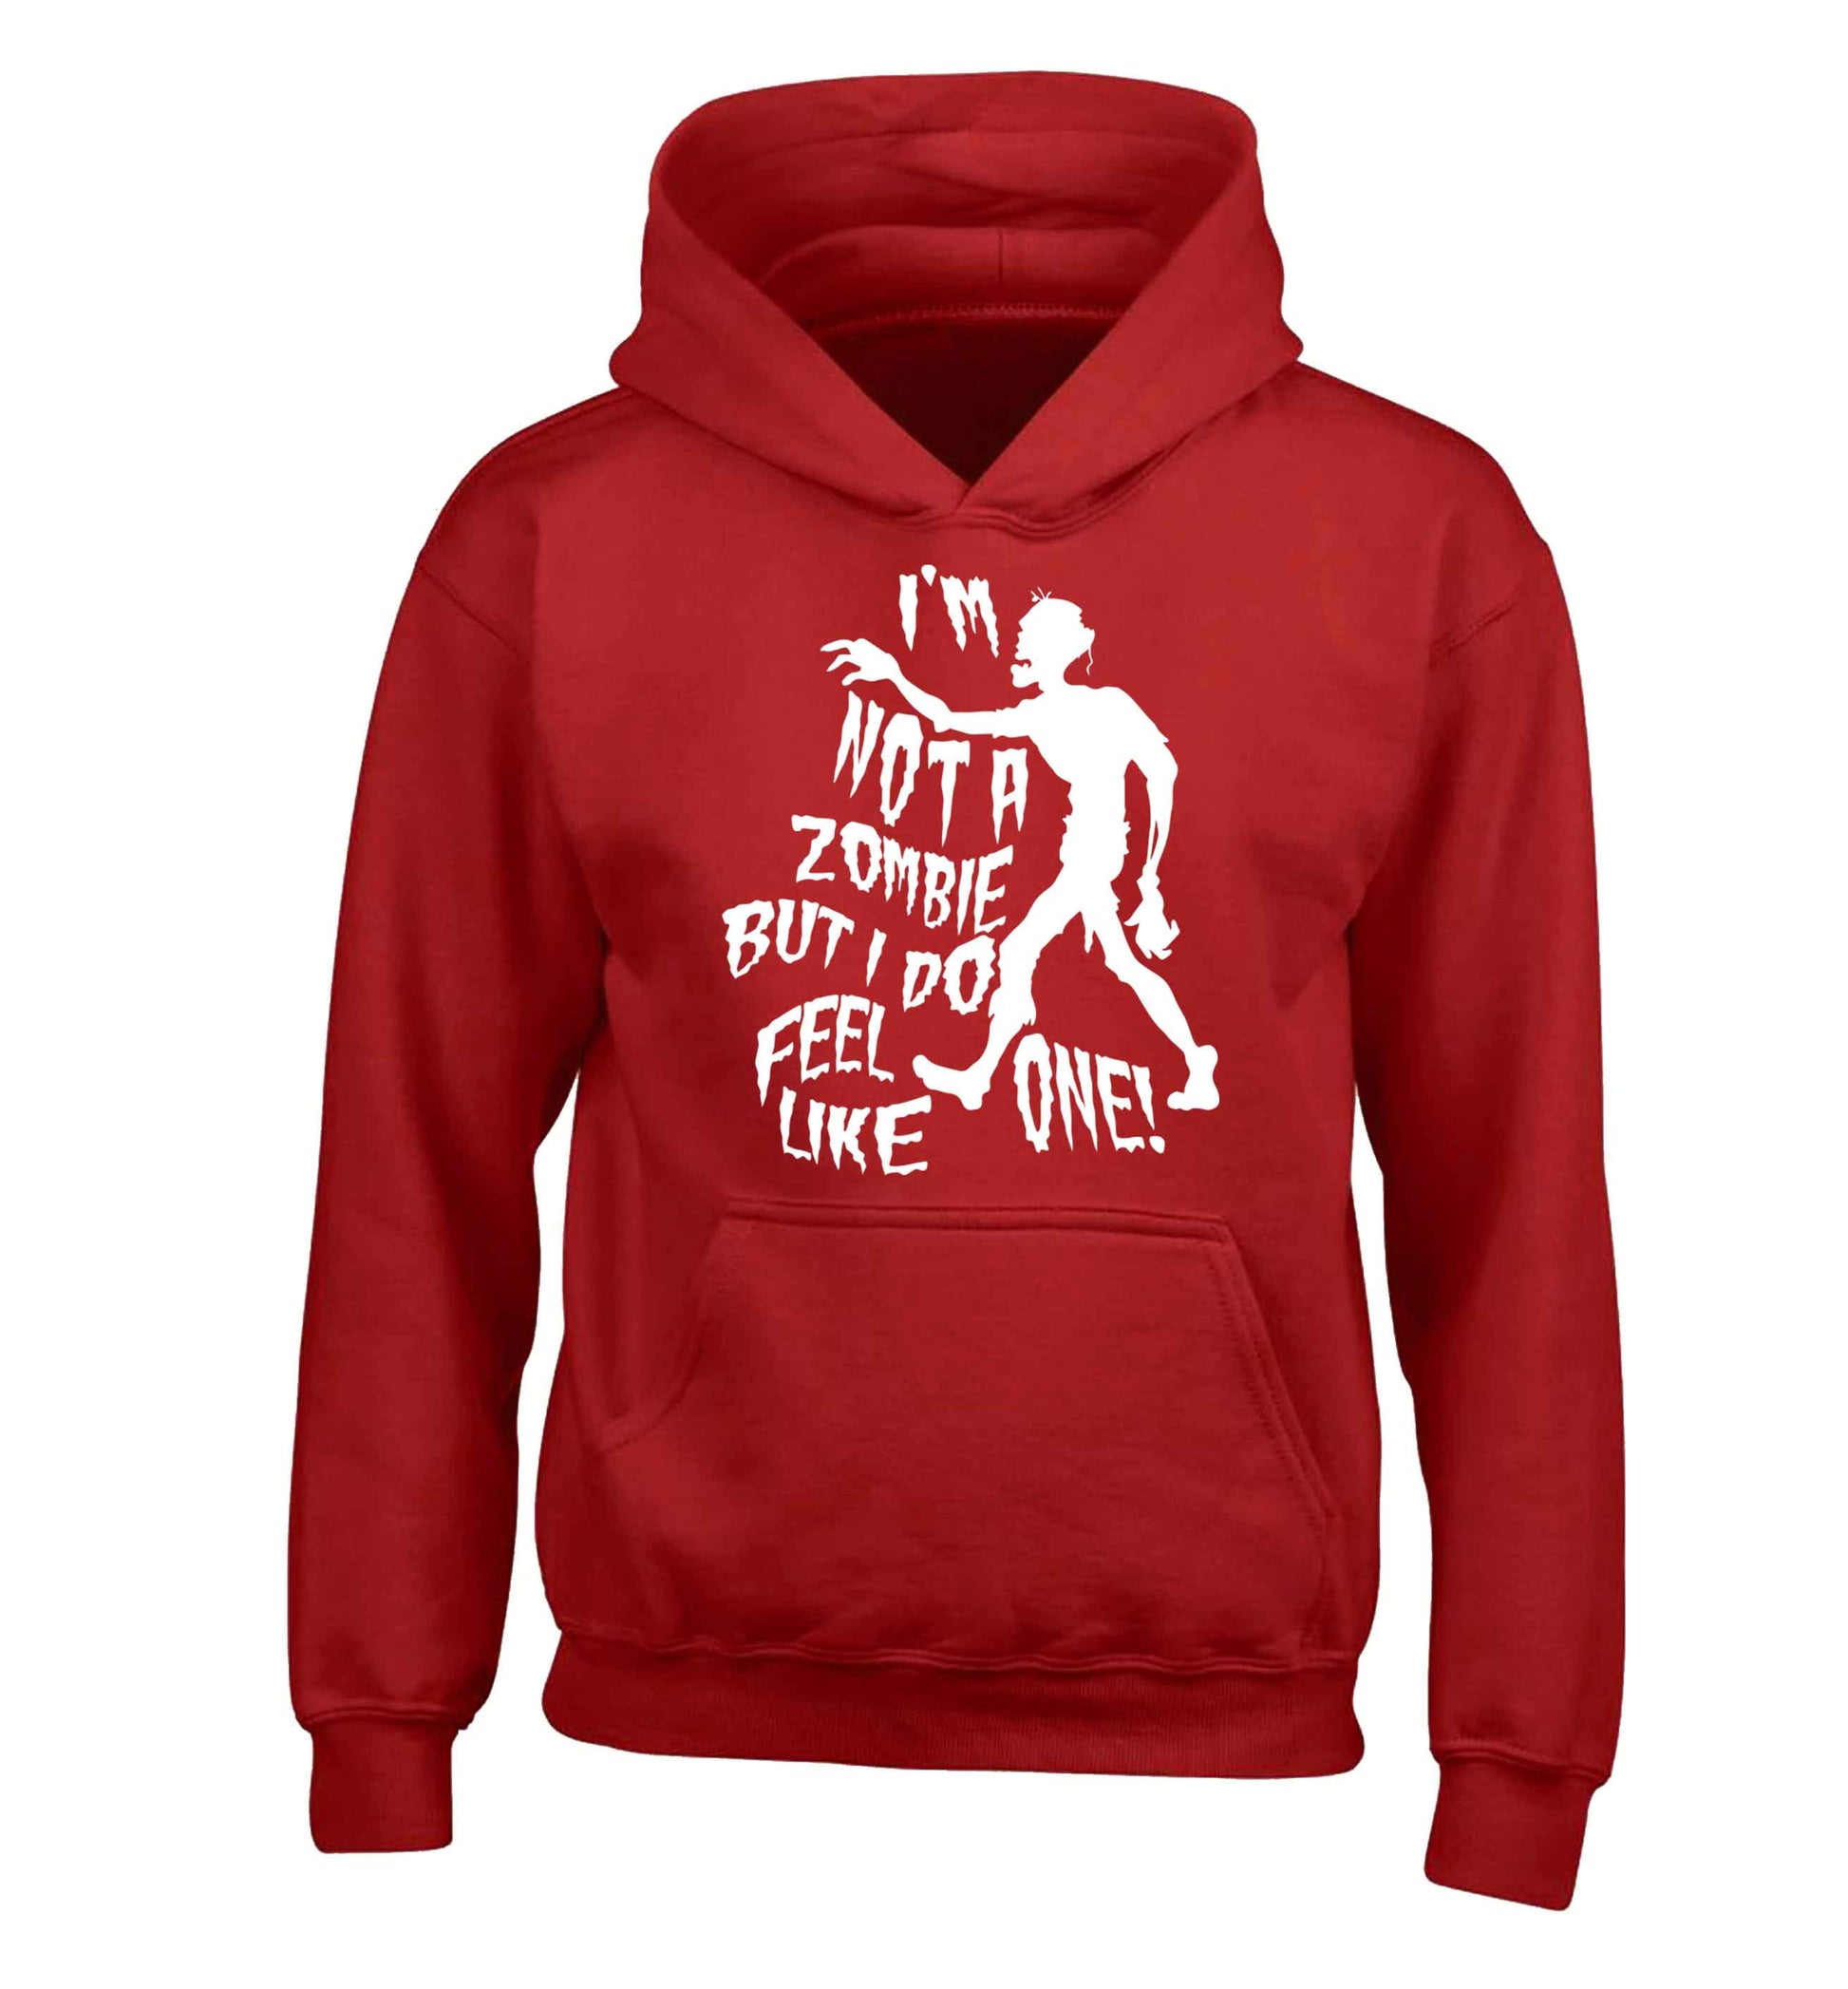 I'm not a zombie but I do feel like one! children's red hoodie 12-13 Years